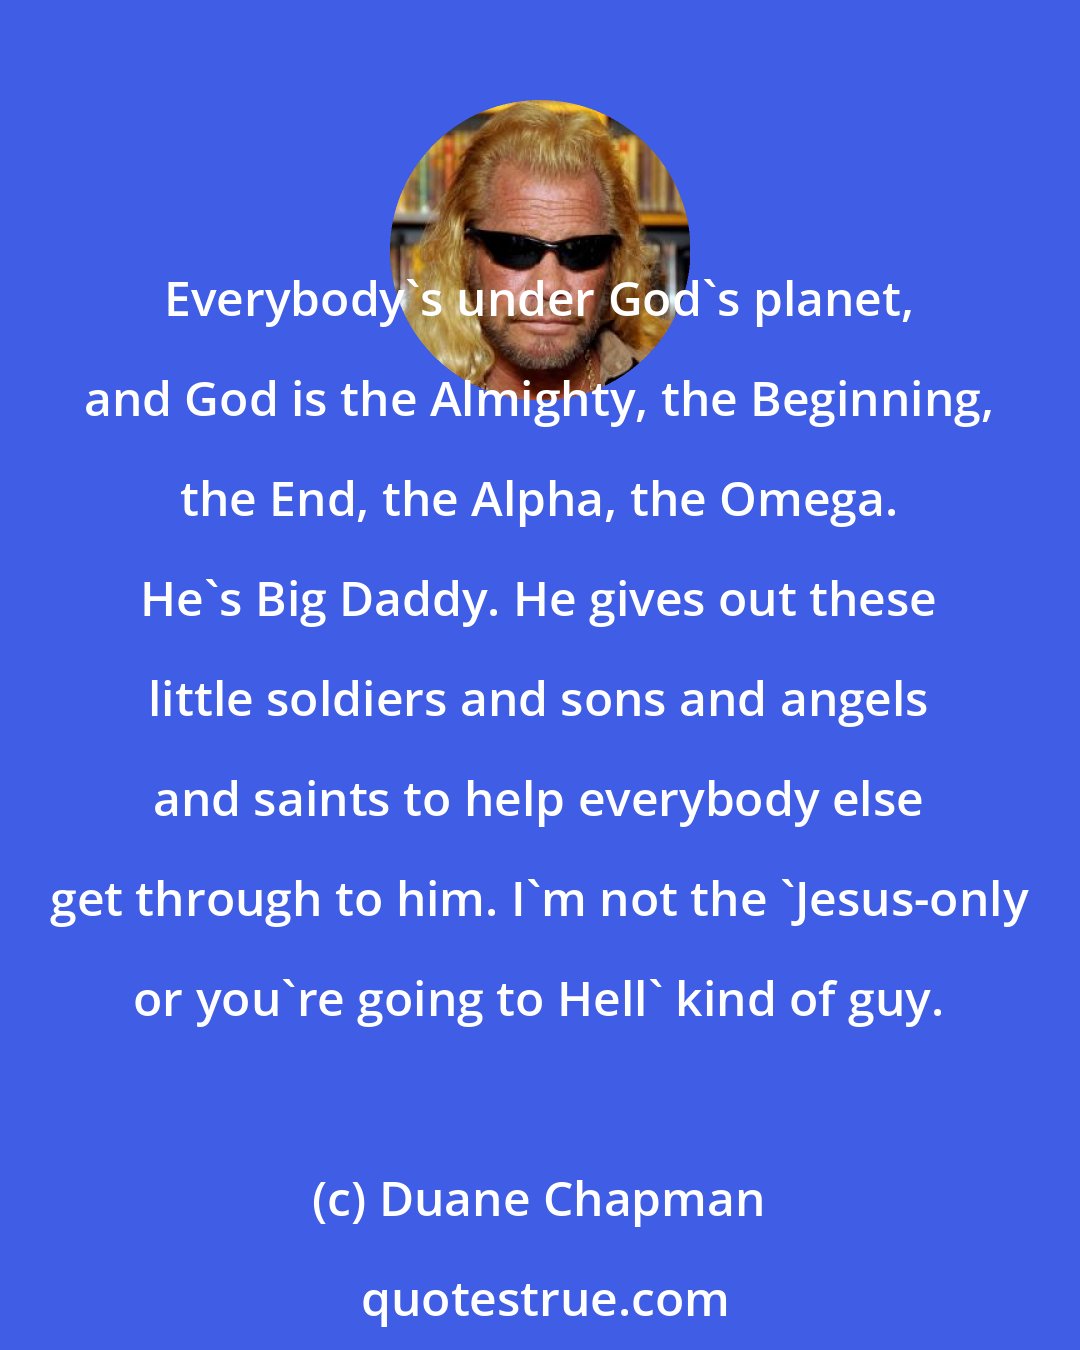 Duane Chapman: Everybody's under God's planet, and God is the Almighty, the Beginning, the End, the Alpha, the Omega. He's Big Daddy. He gives out these little soldiers and sons and angels and saints to help everybody else get through to him. I'm not the 'Jesus-only or you're going to Hell' kind of guy.